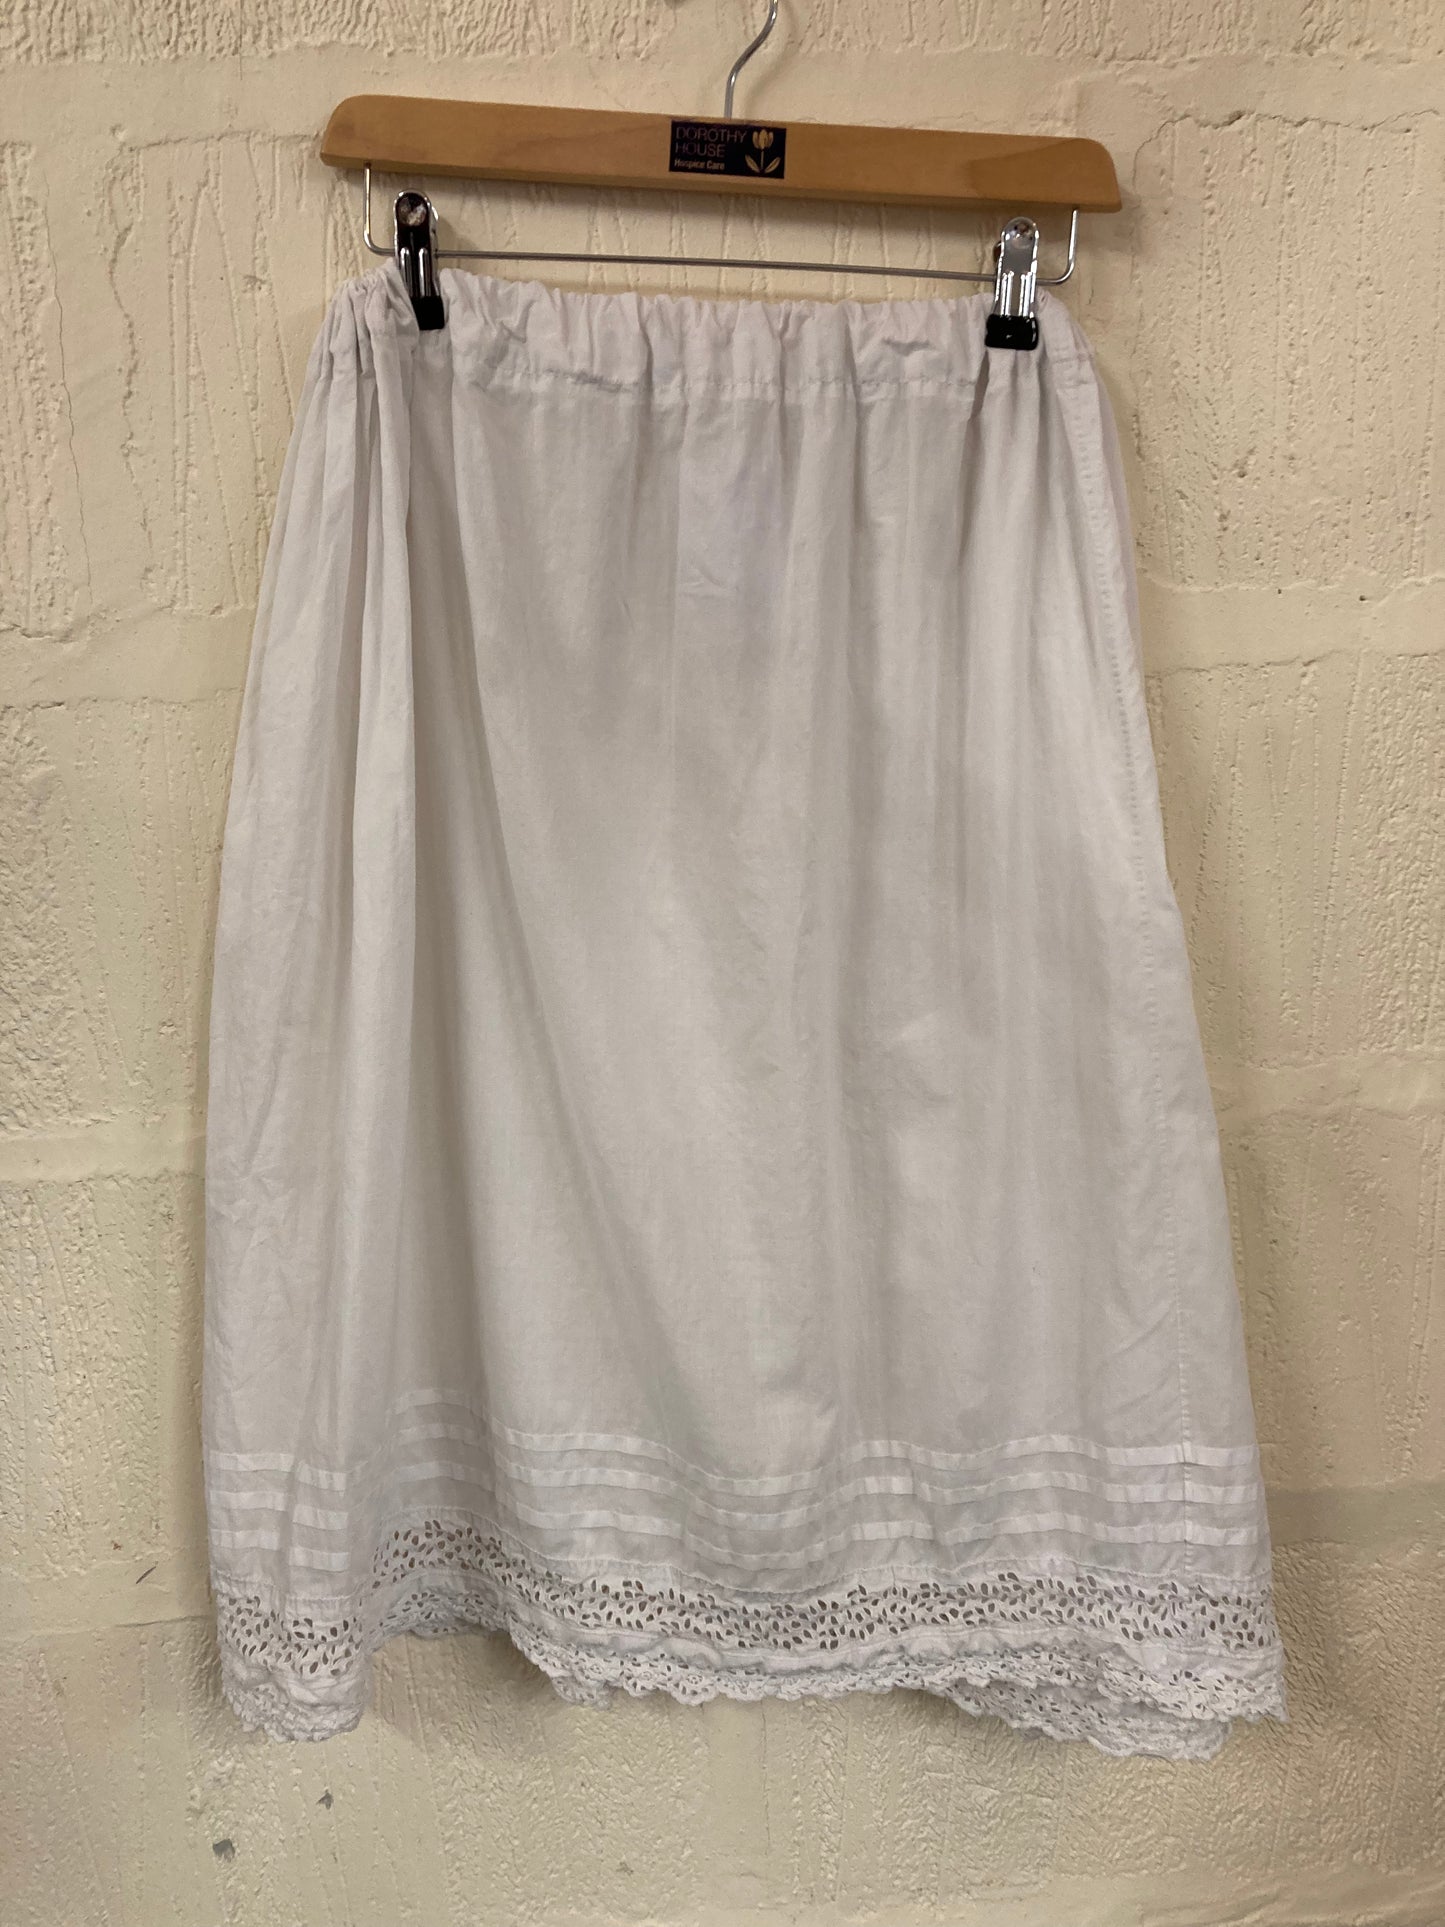 Vintage Simple White Skirt With Broderie Anglais Hem Size 12-14